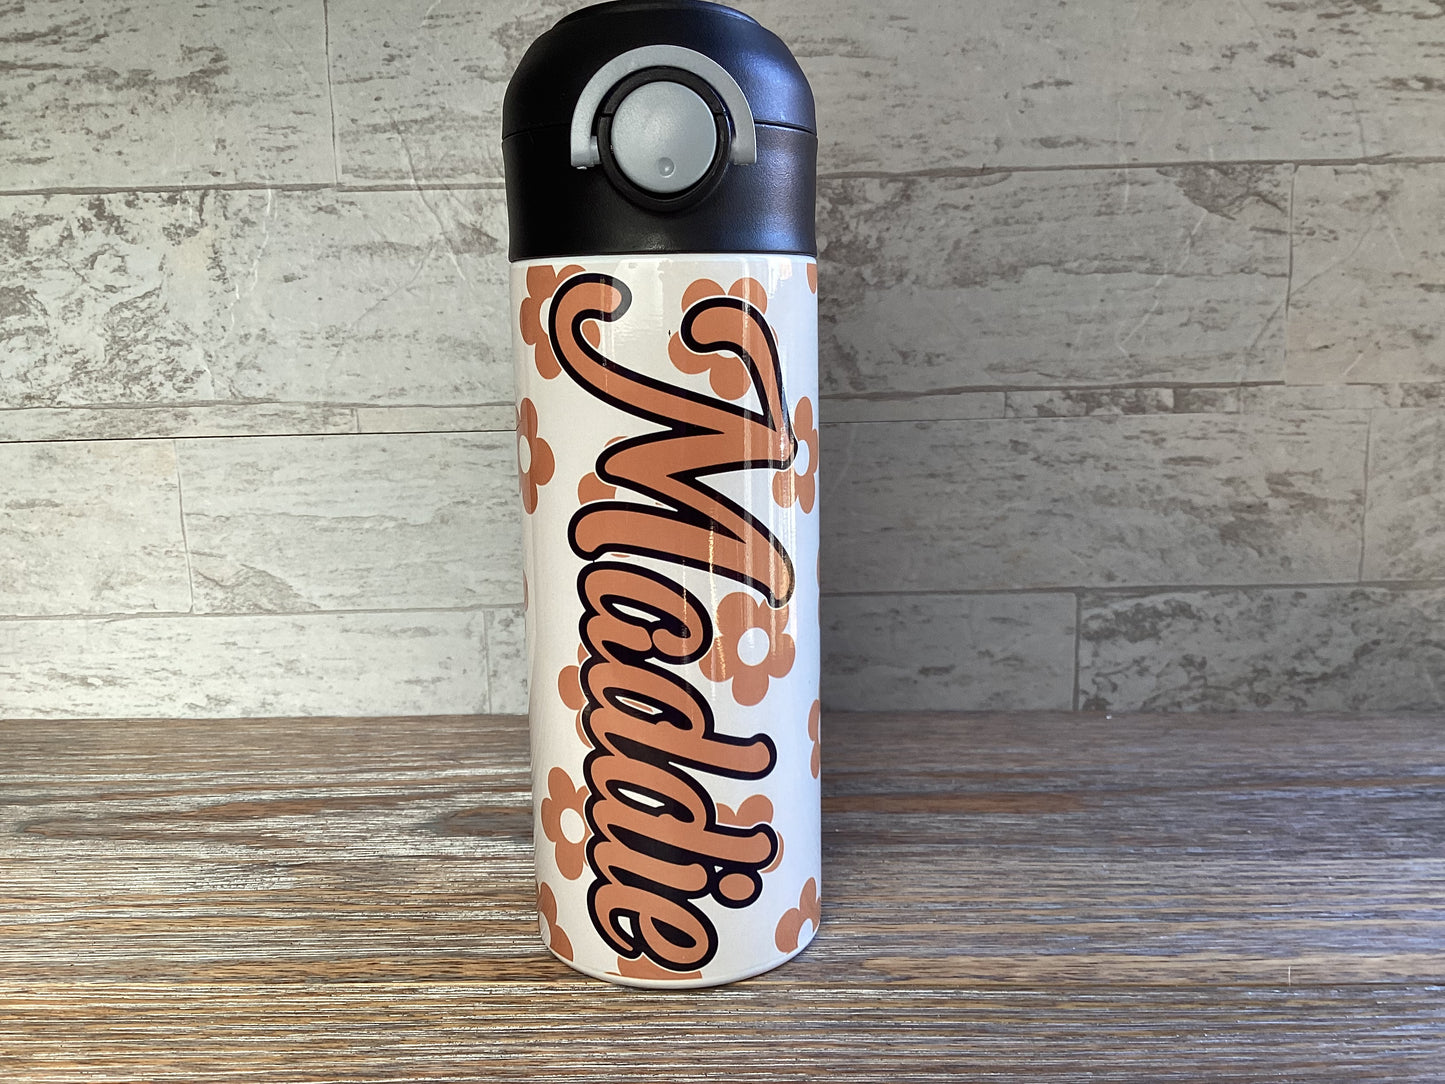 Retro Daisies Flip Top Water Bottle - Personalized